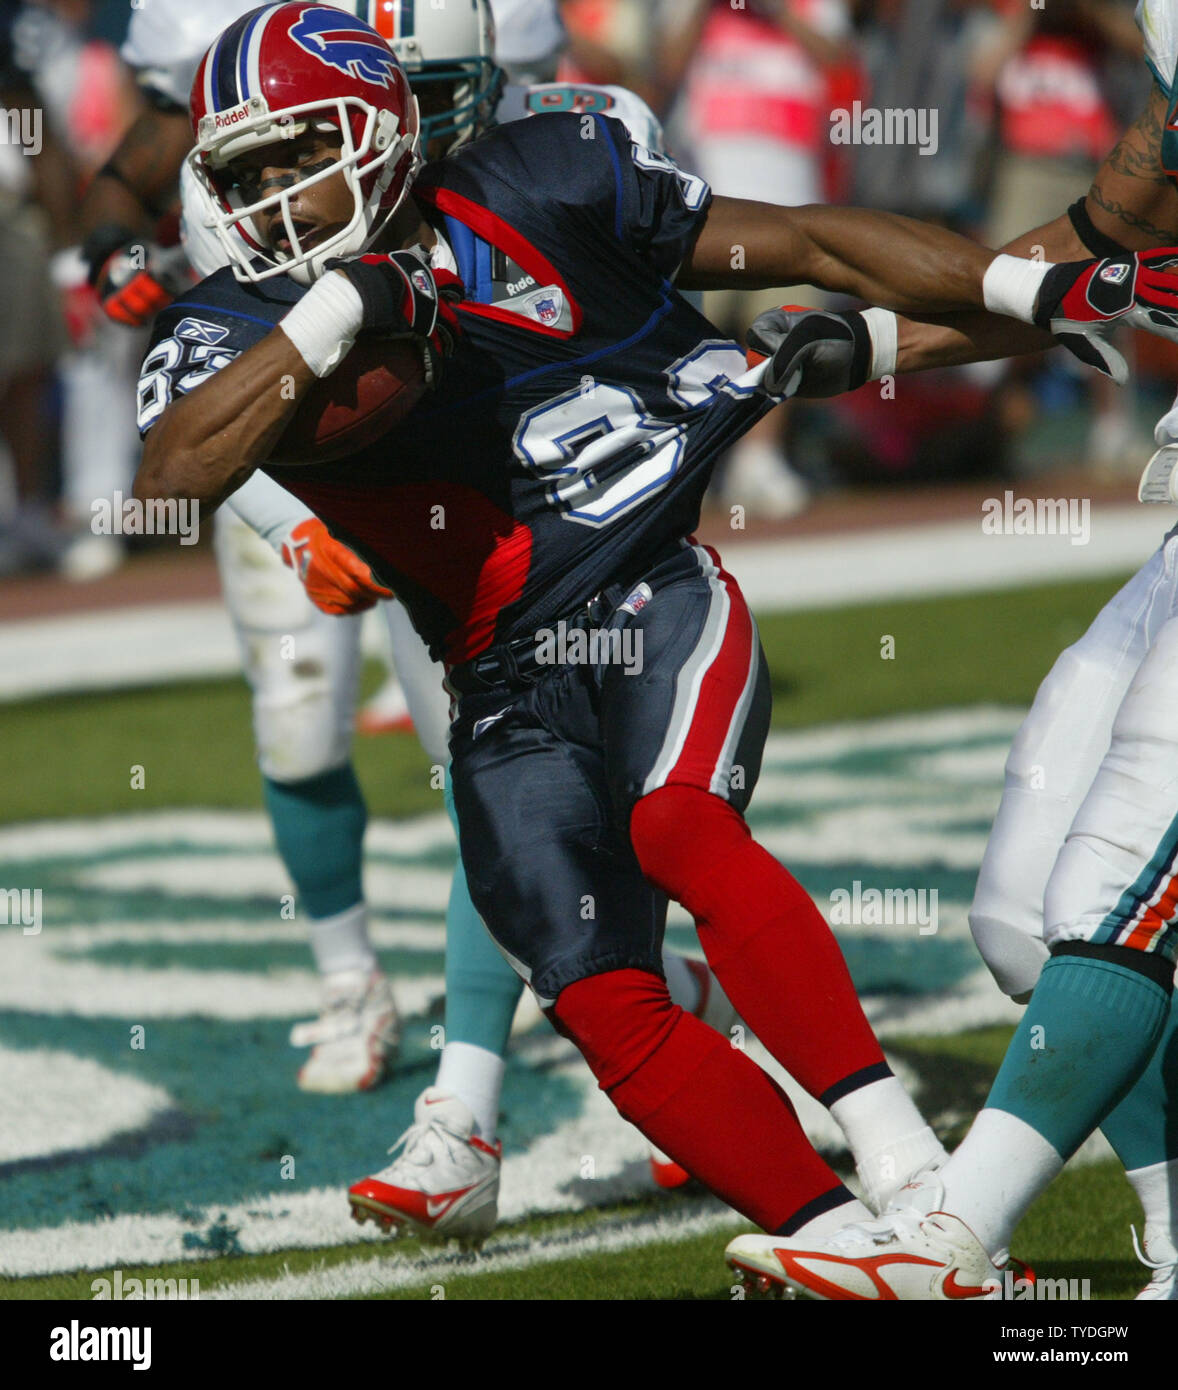 Buffalo Bills wide receiver Lee Evans (83) scores his third touchdown  against the Miami Dolphins December 4, 2005 at Dolphins Stadium in Miami,  Fl. The Buffalo Bills lost to the the Miami